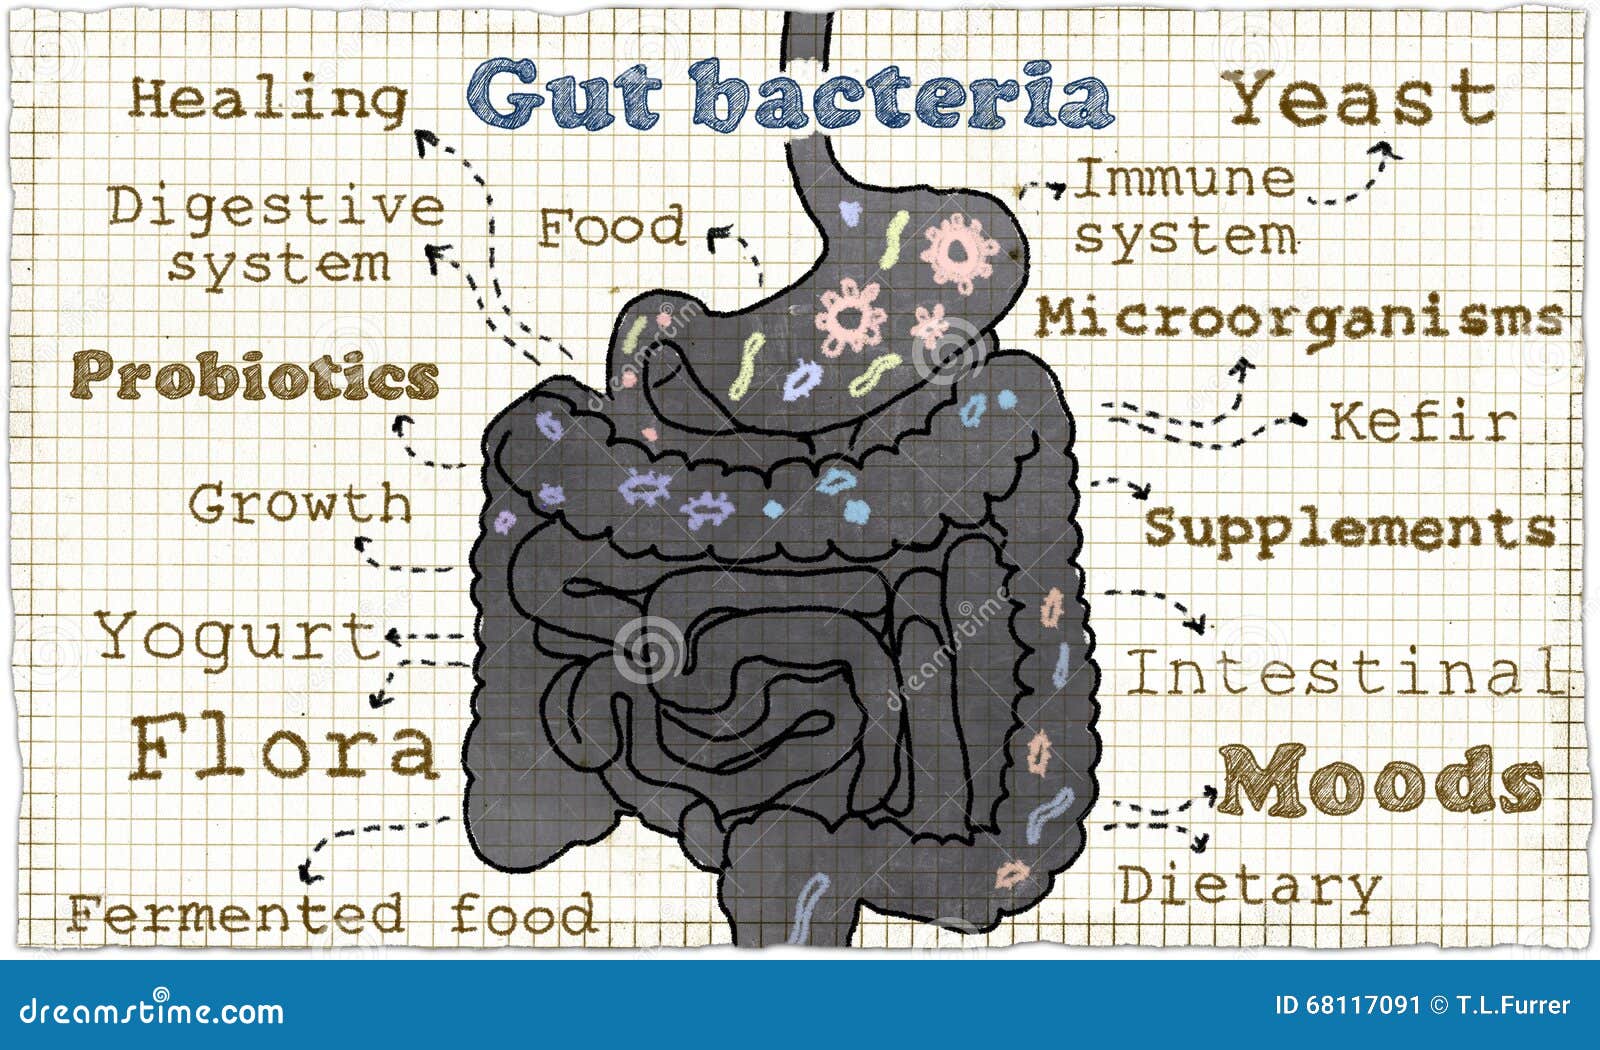  about gut bacteria